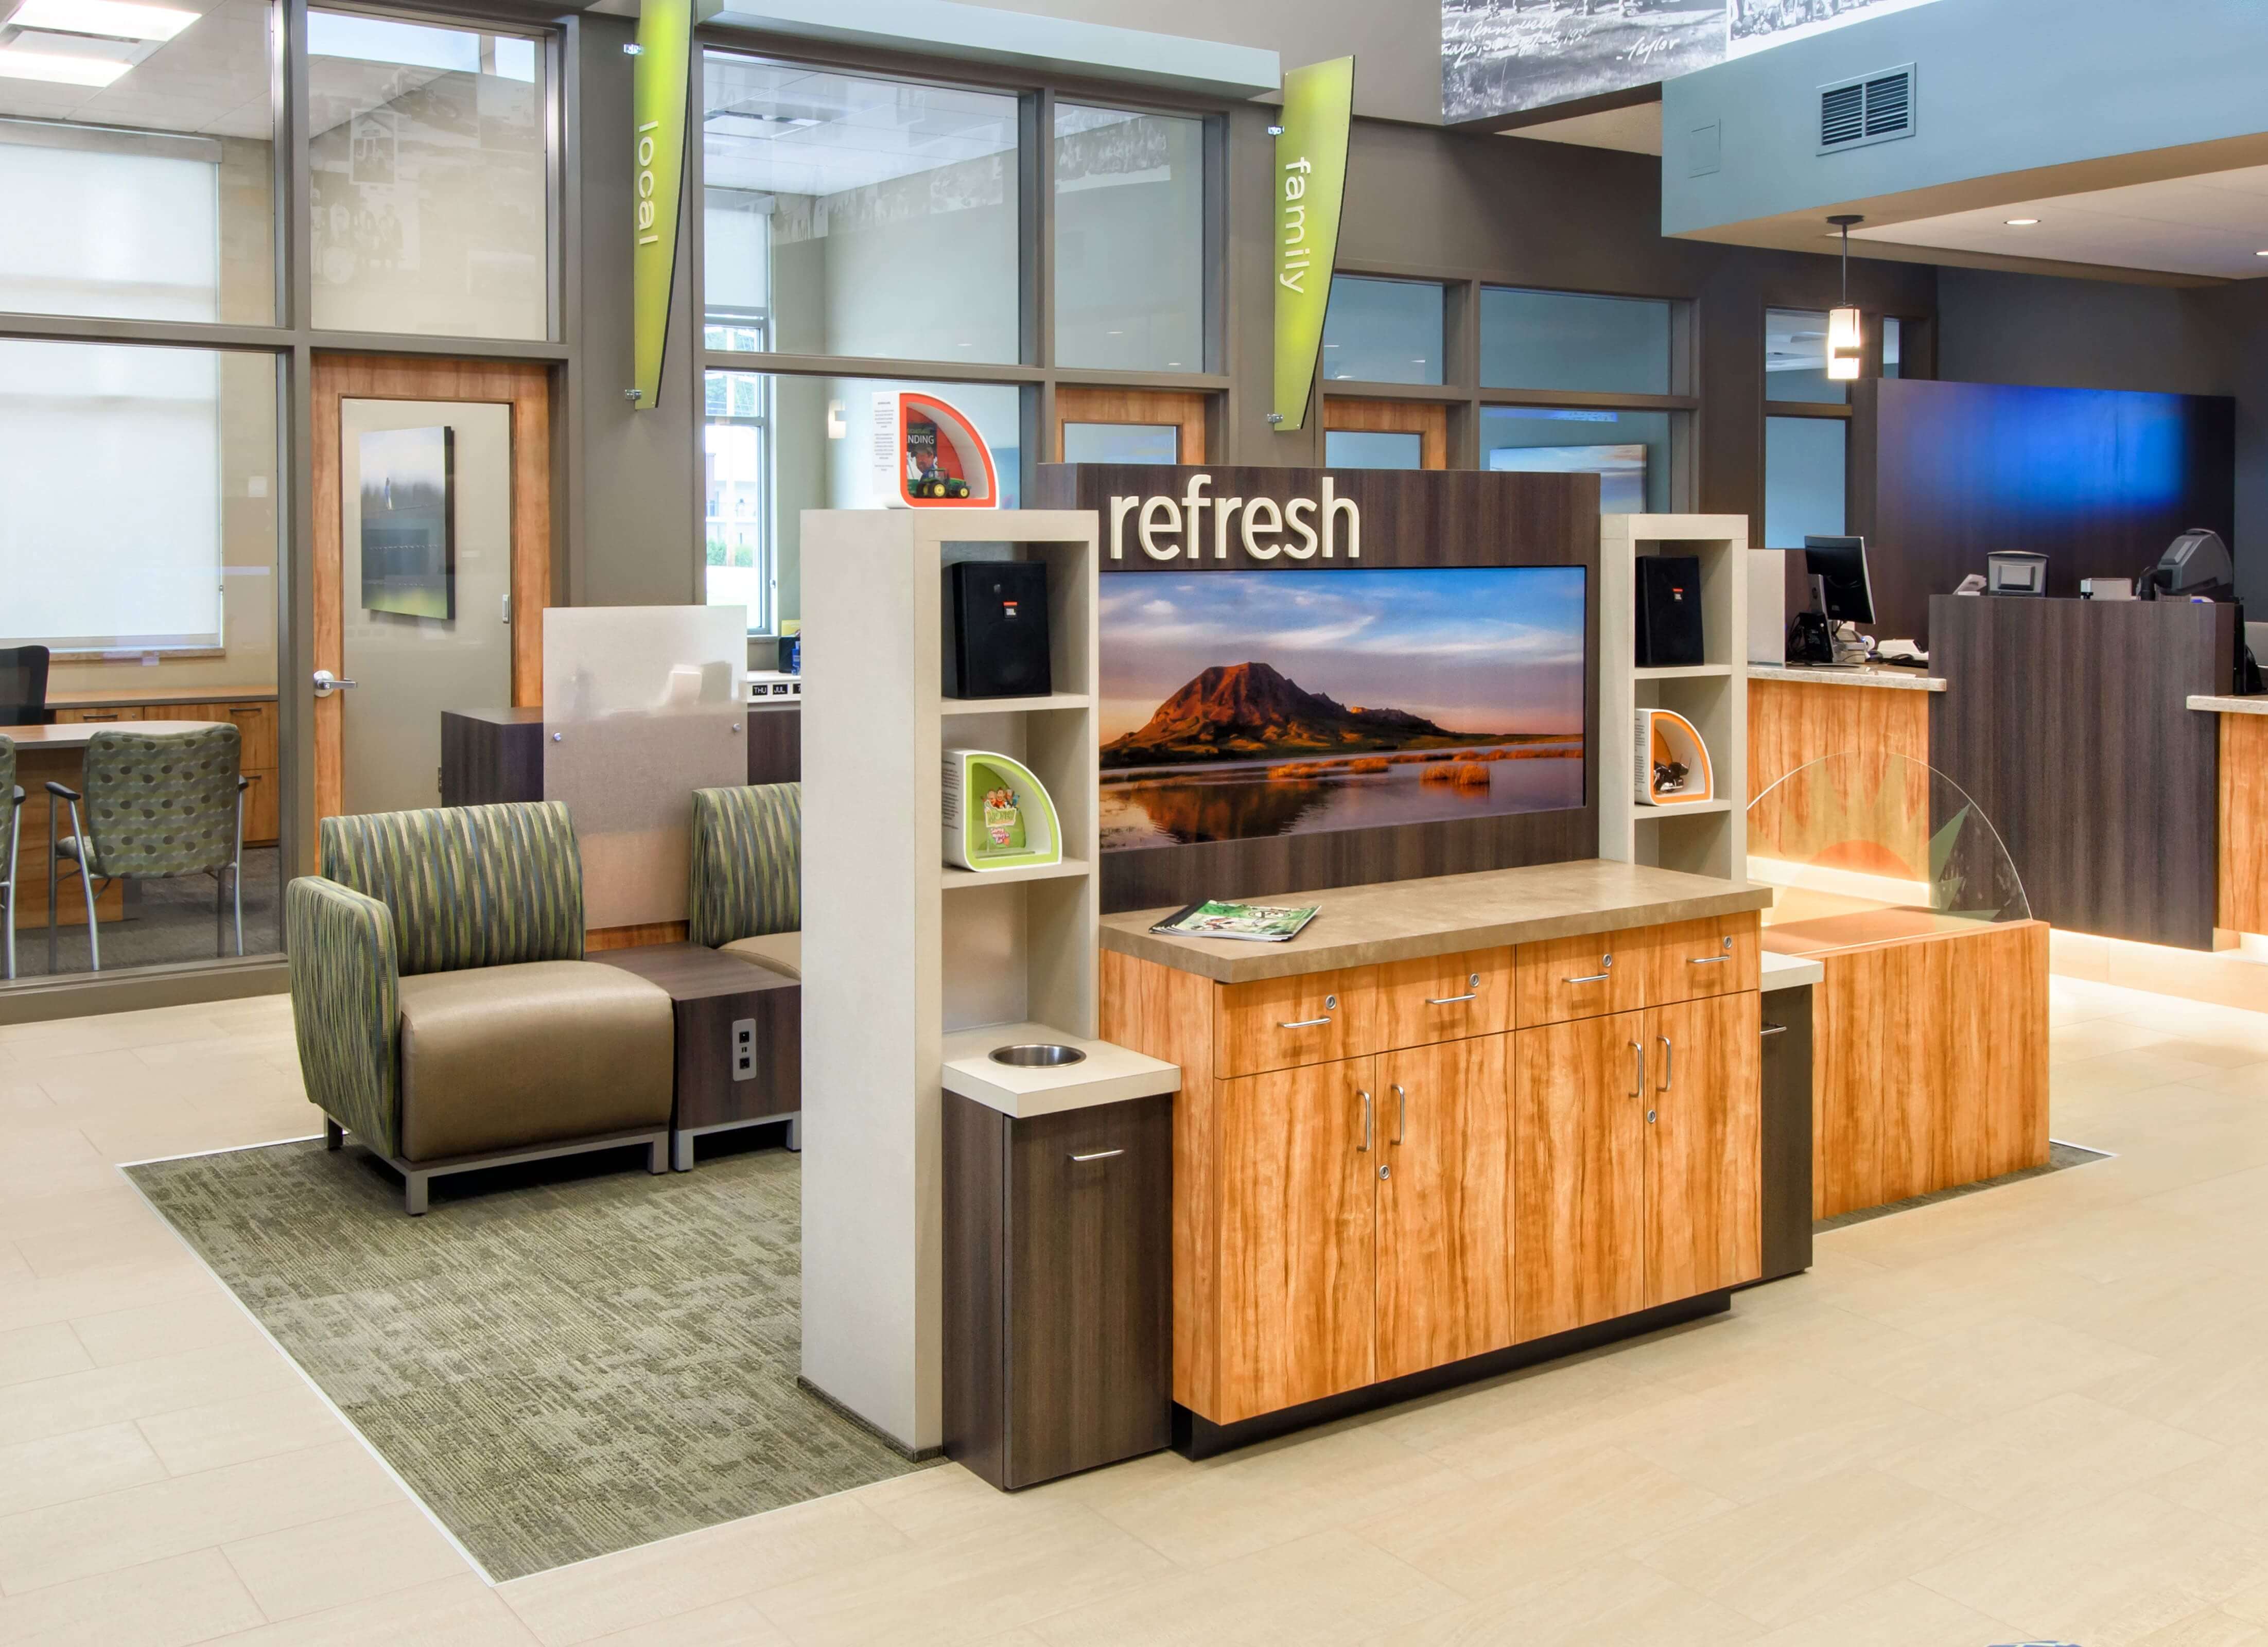 Refreshment station in a credit union